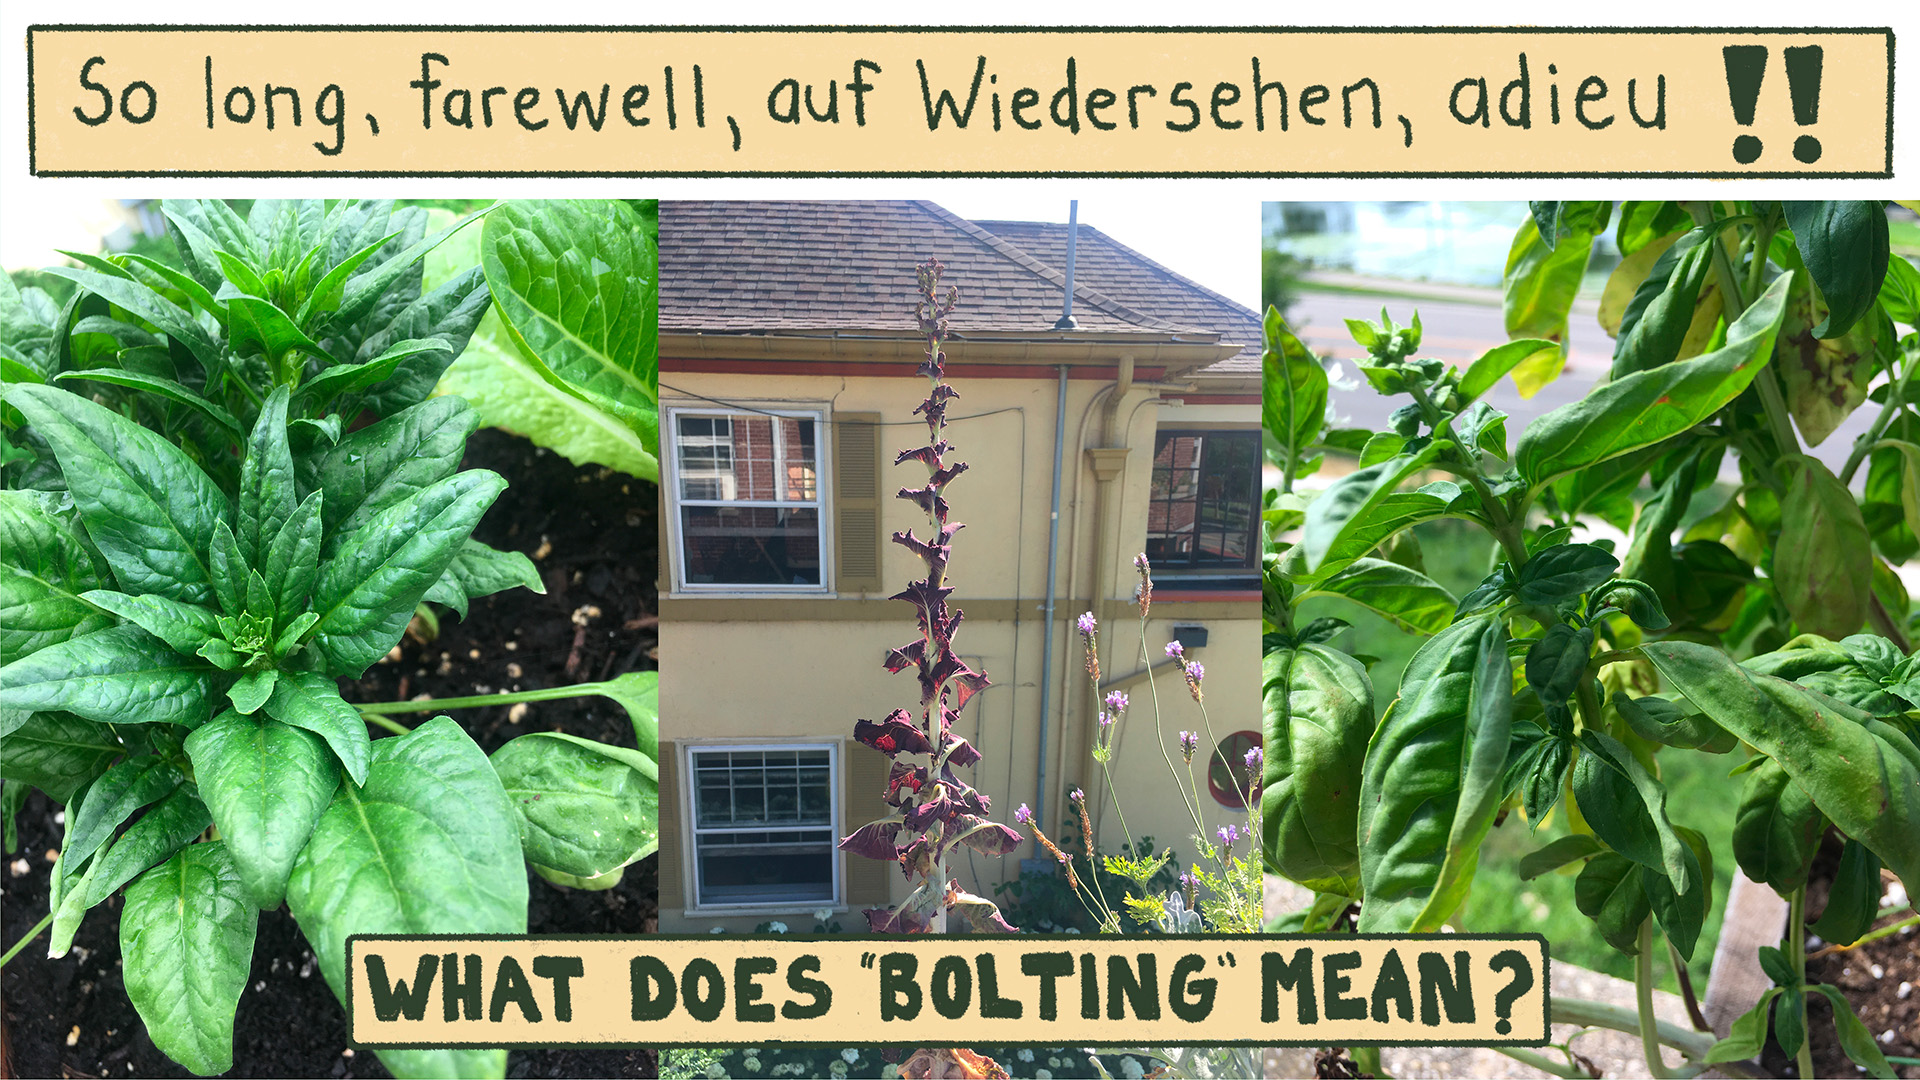 A photo collage of spinach and lettuce plants bolting